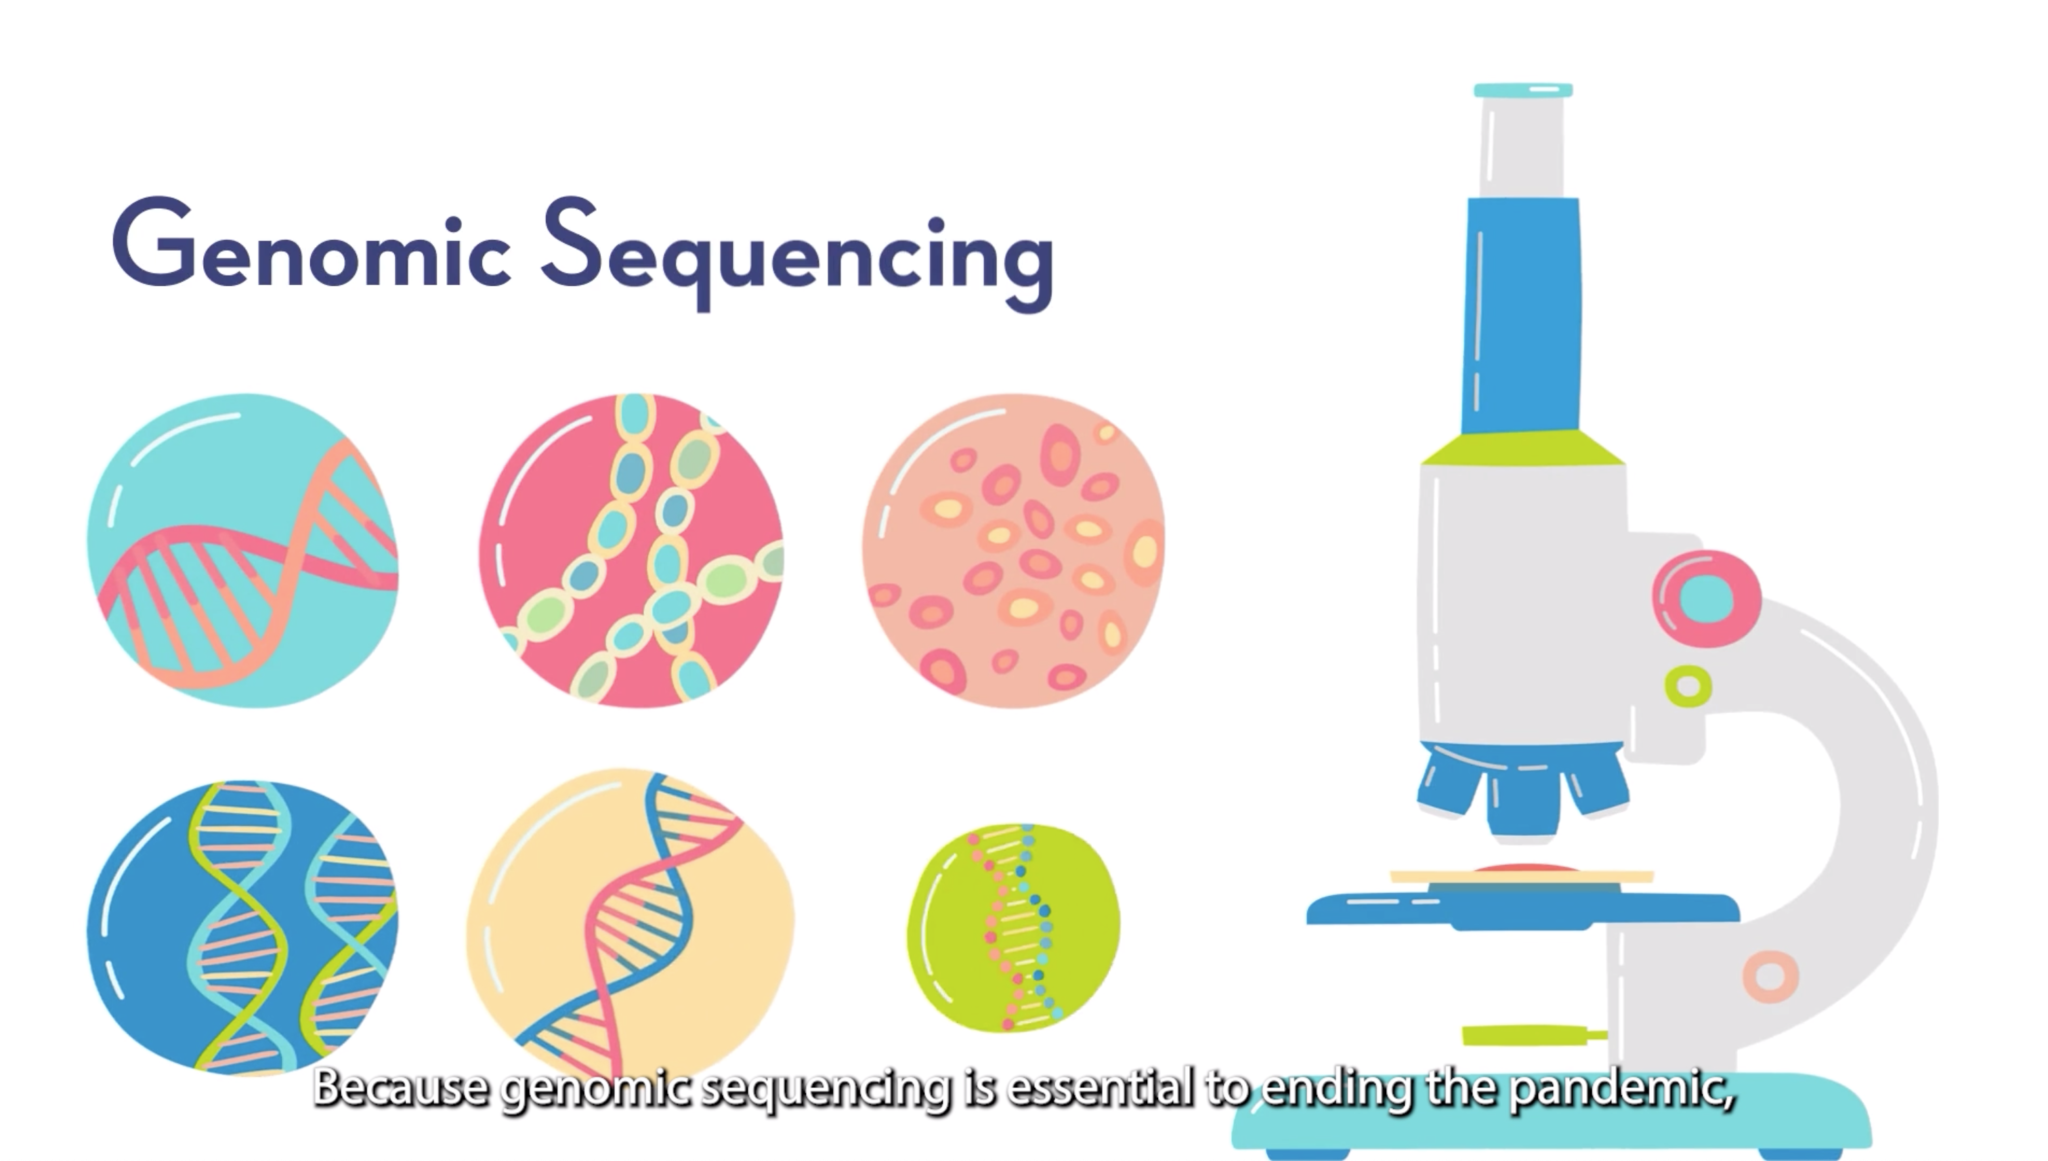 Genomic Sequencing Advocates Call for Bolstered Pandemic Response Infrastructure